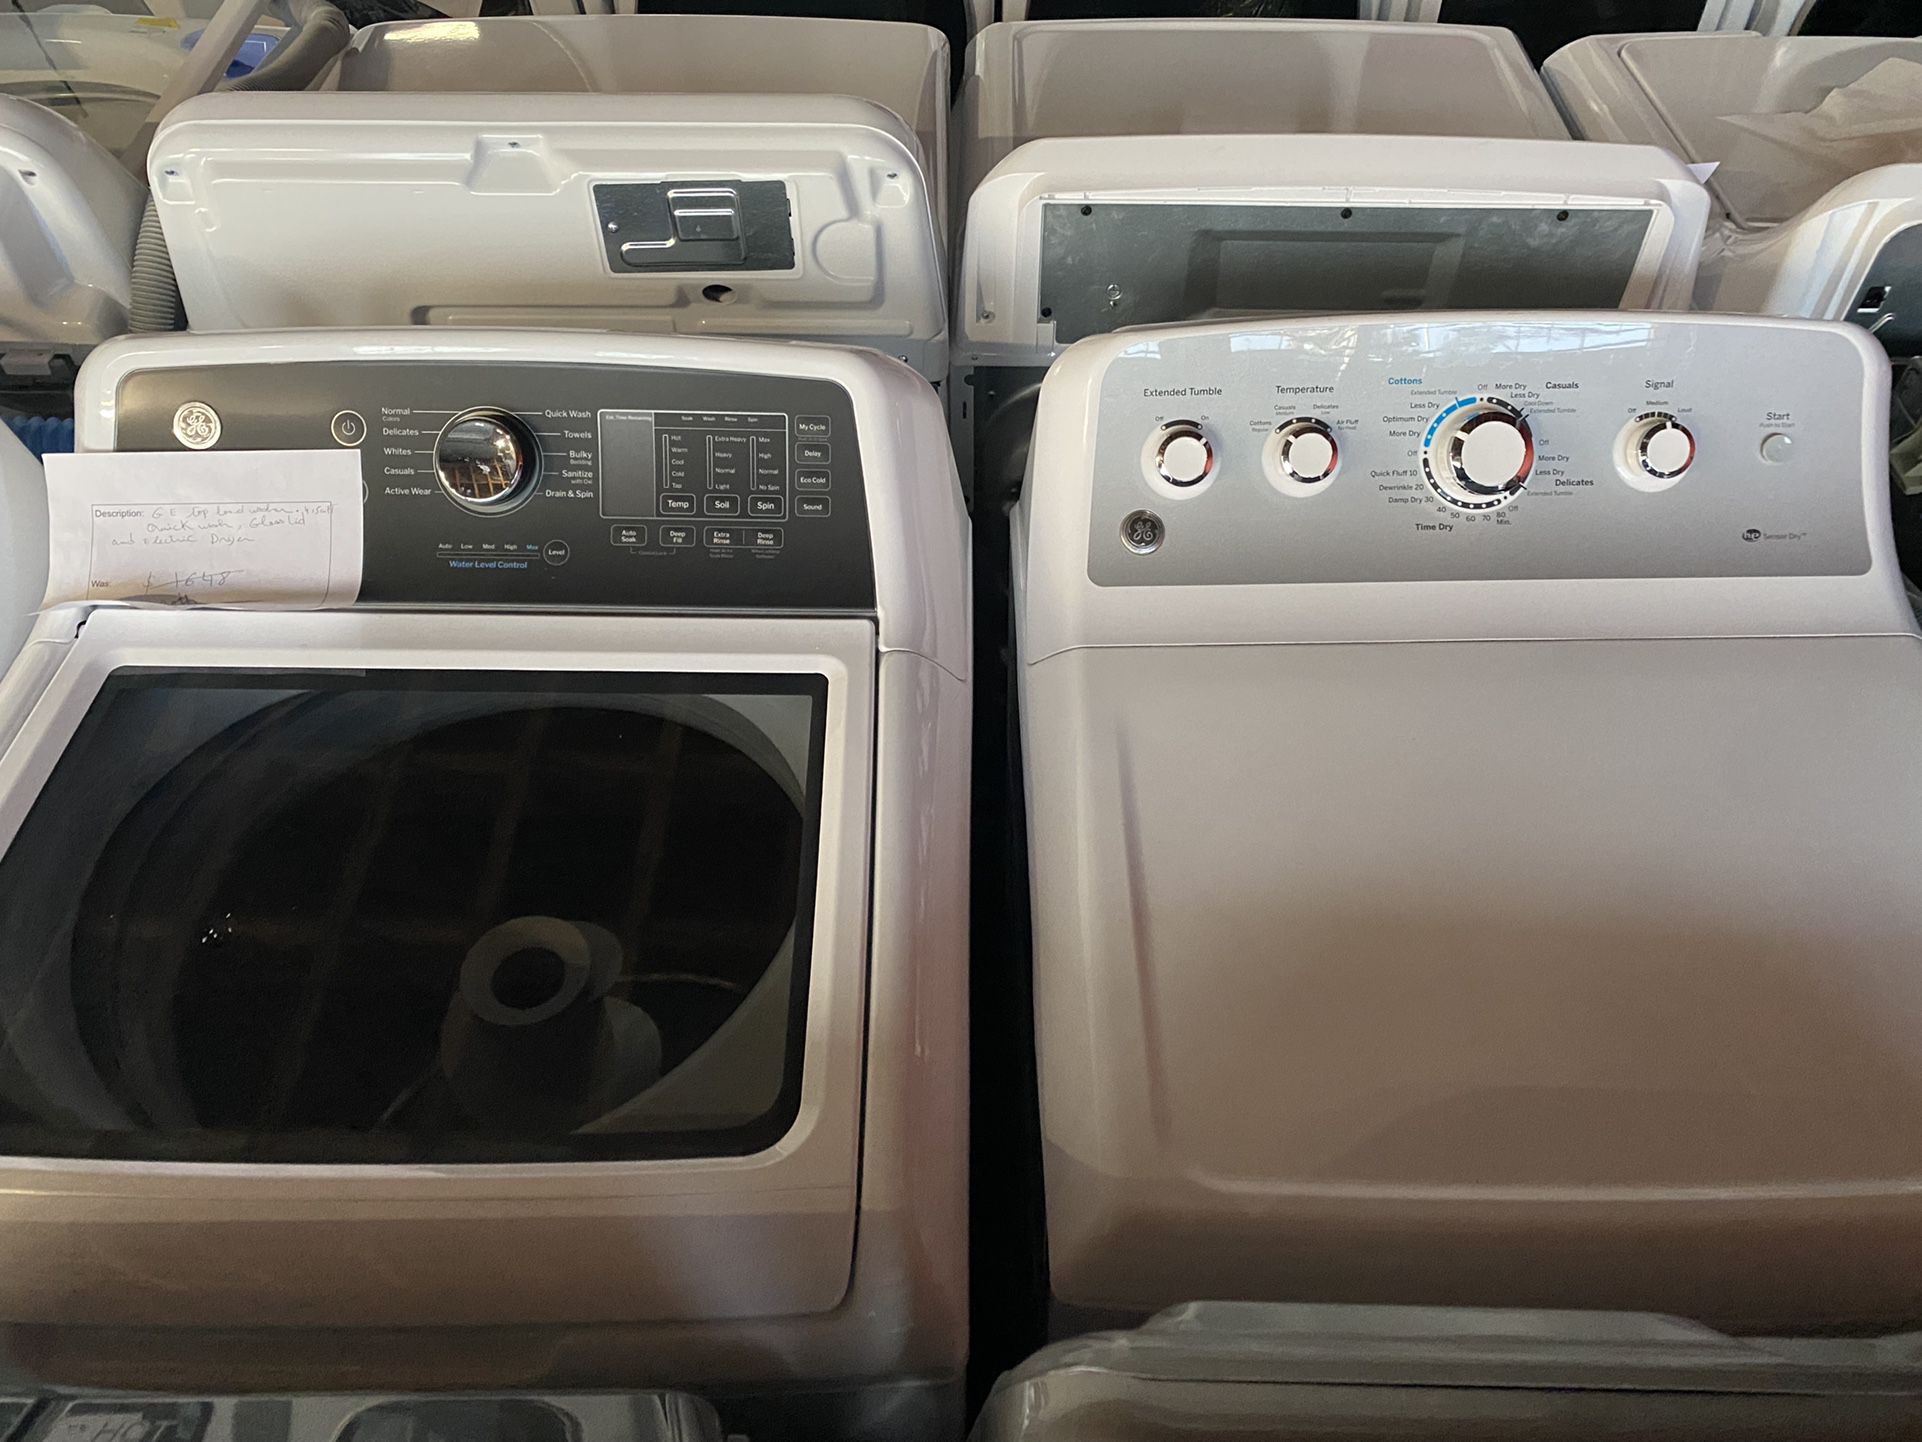 Ge Electric Dryer 